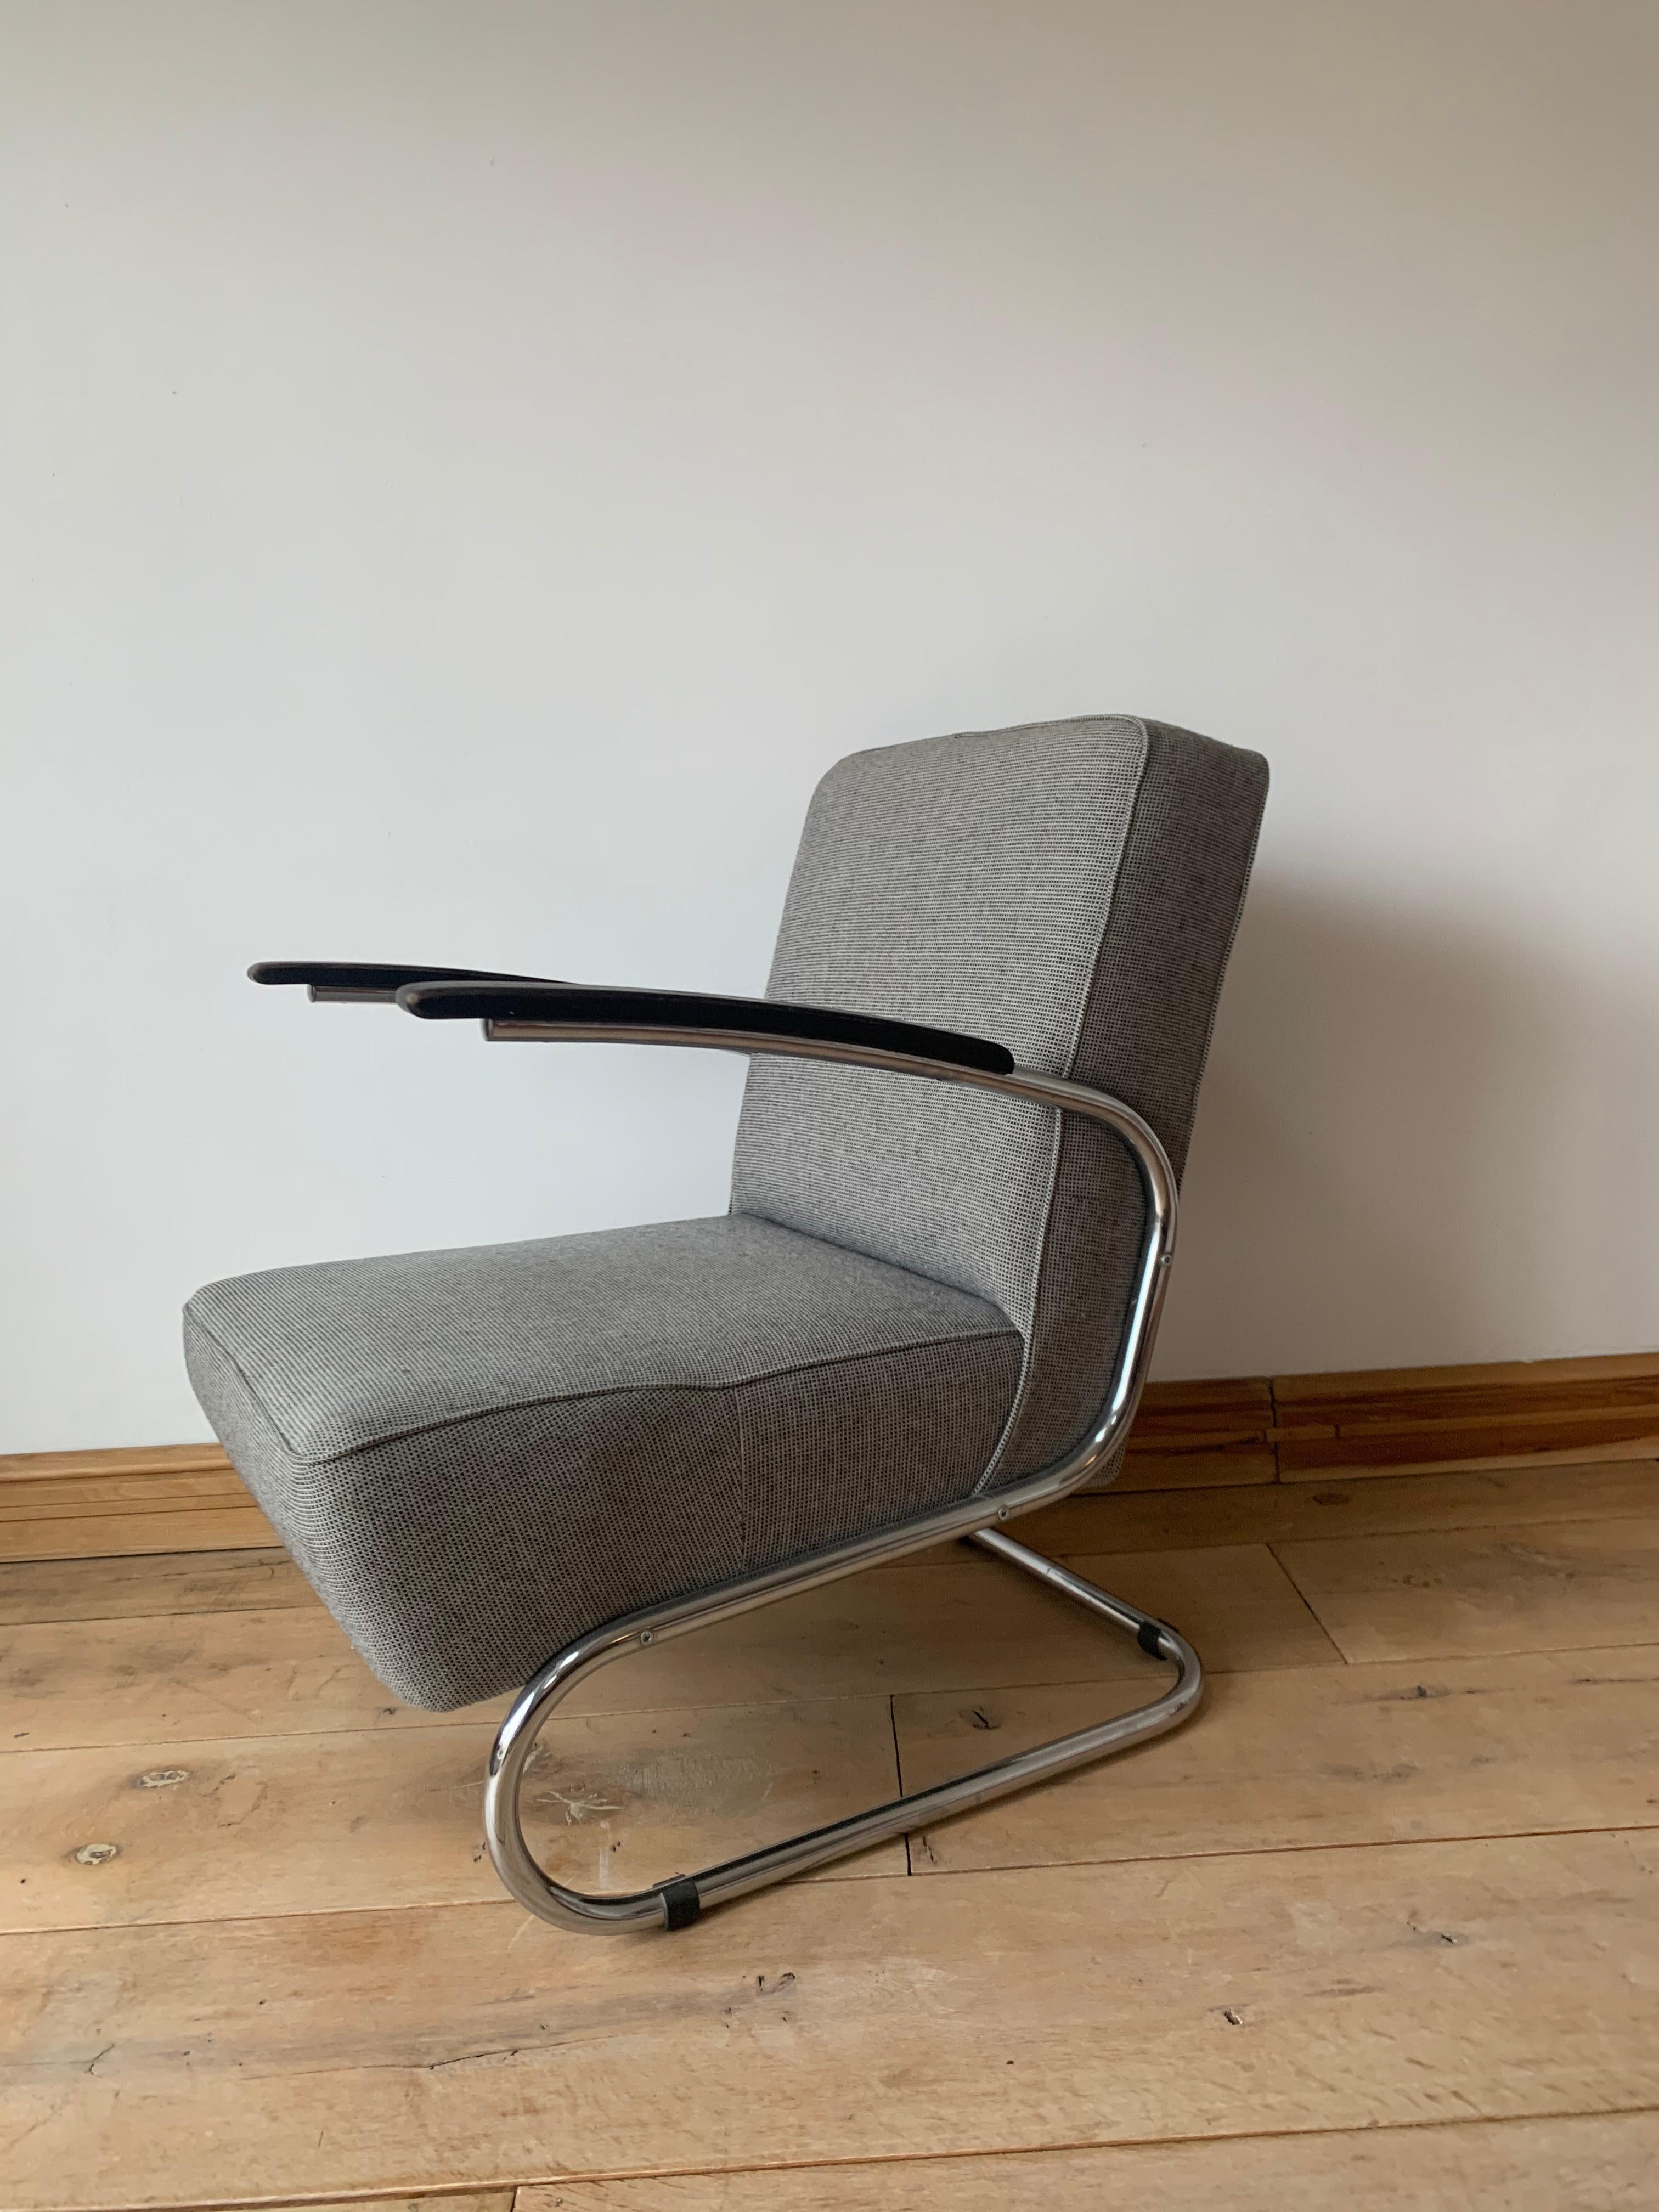 The outstanding properties of this armchair are elegance, timelessness and exceptional seating comfort. Added is a lightness that only a cantilever model can have. Designed in 1932 by the Thonet design team. Undoubtedly one of the icons of modernist